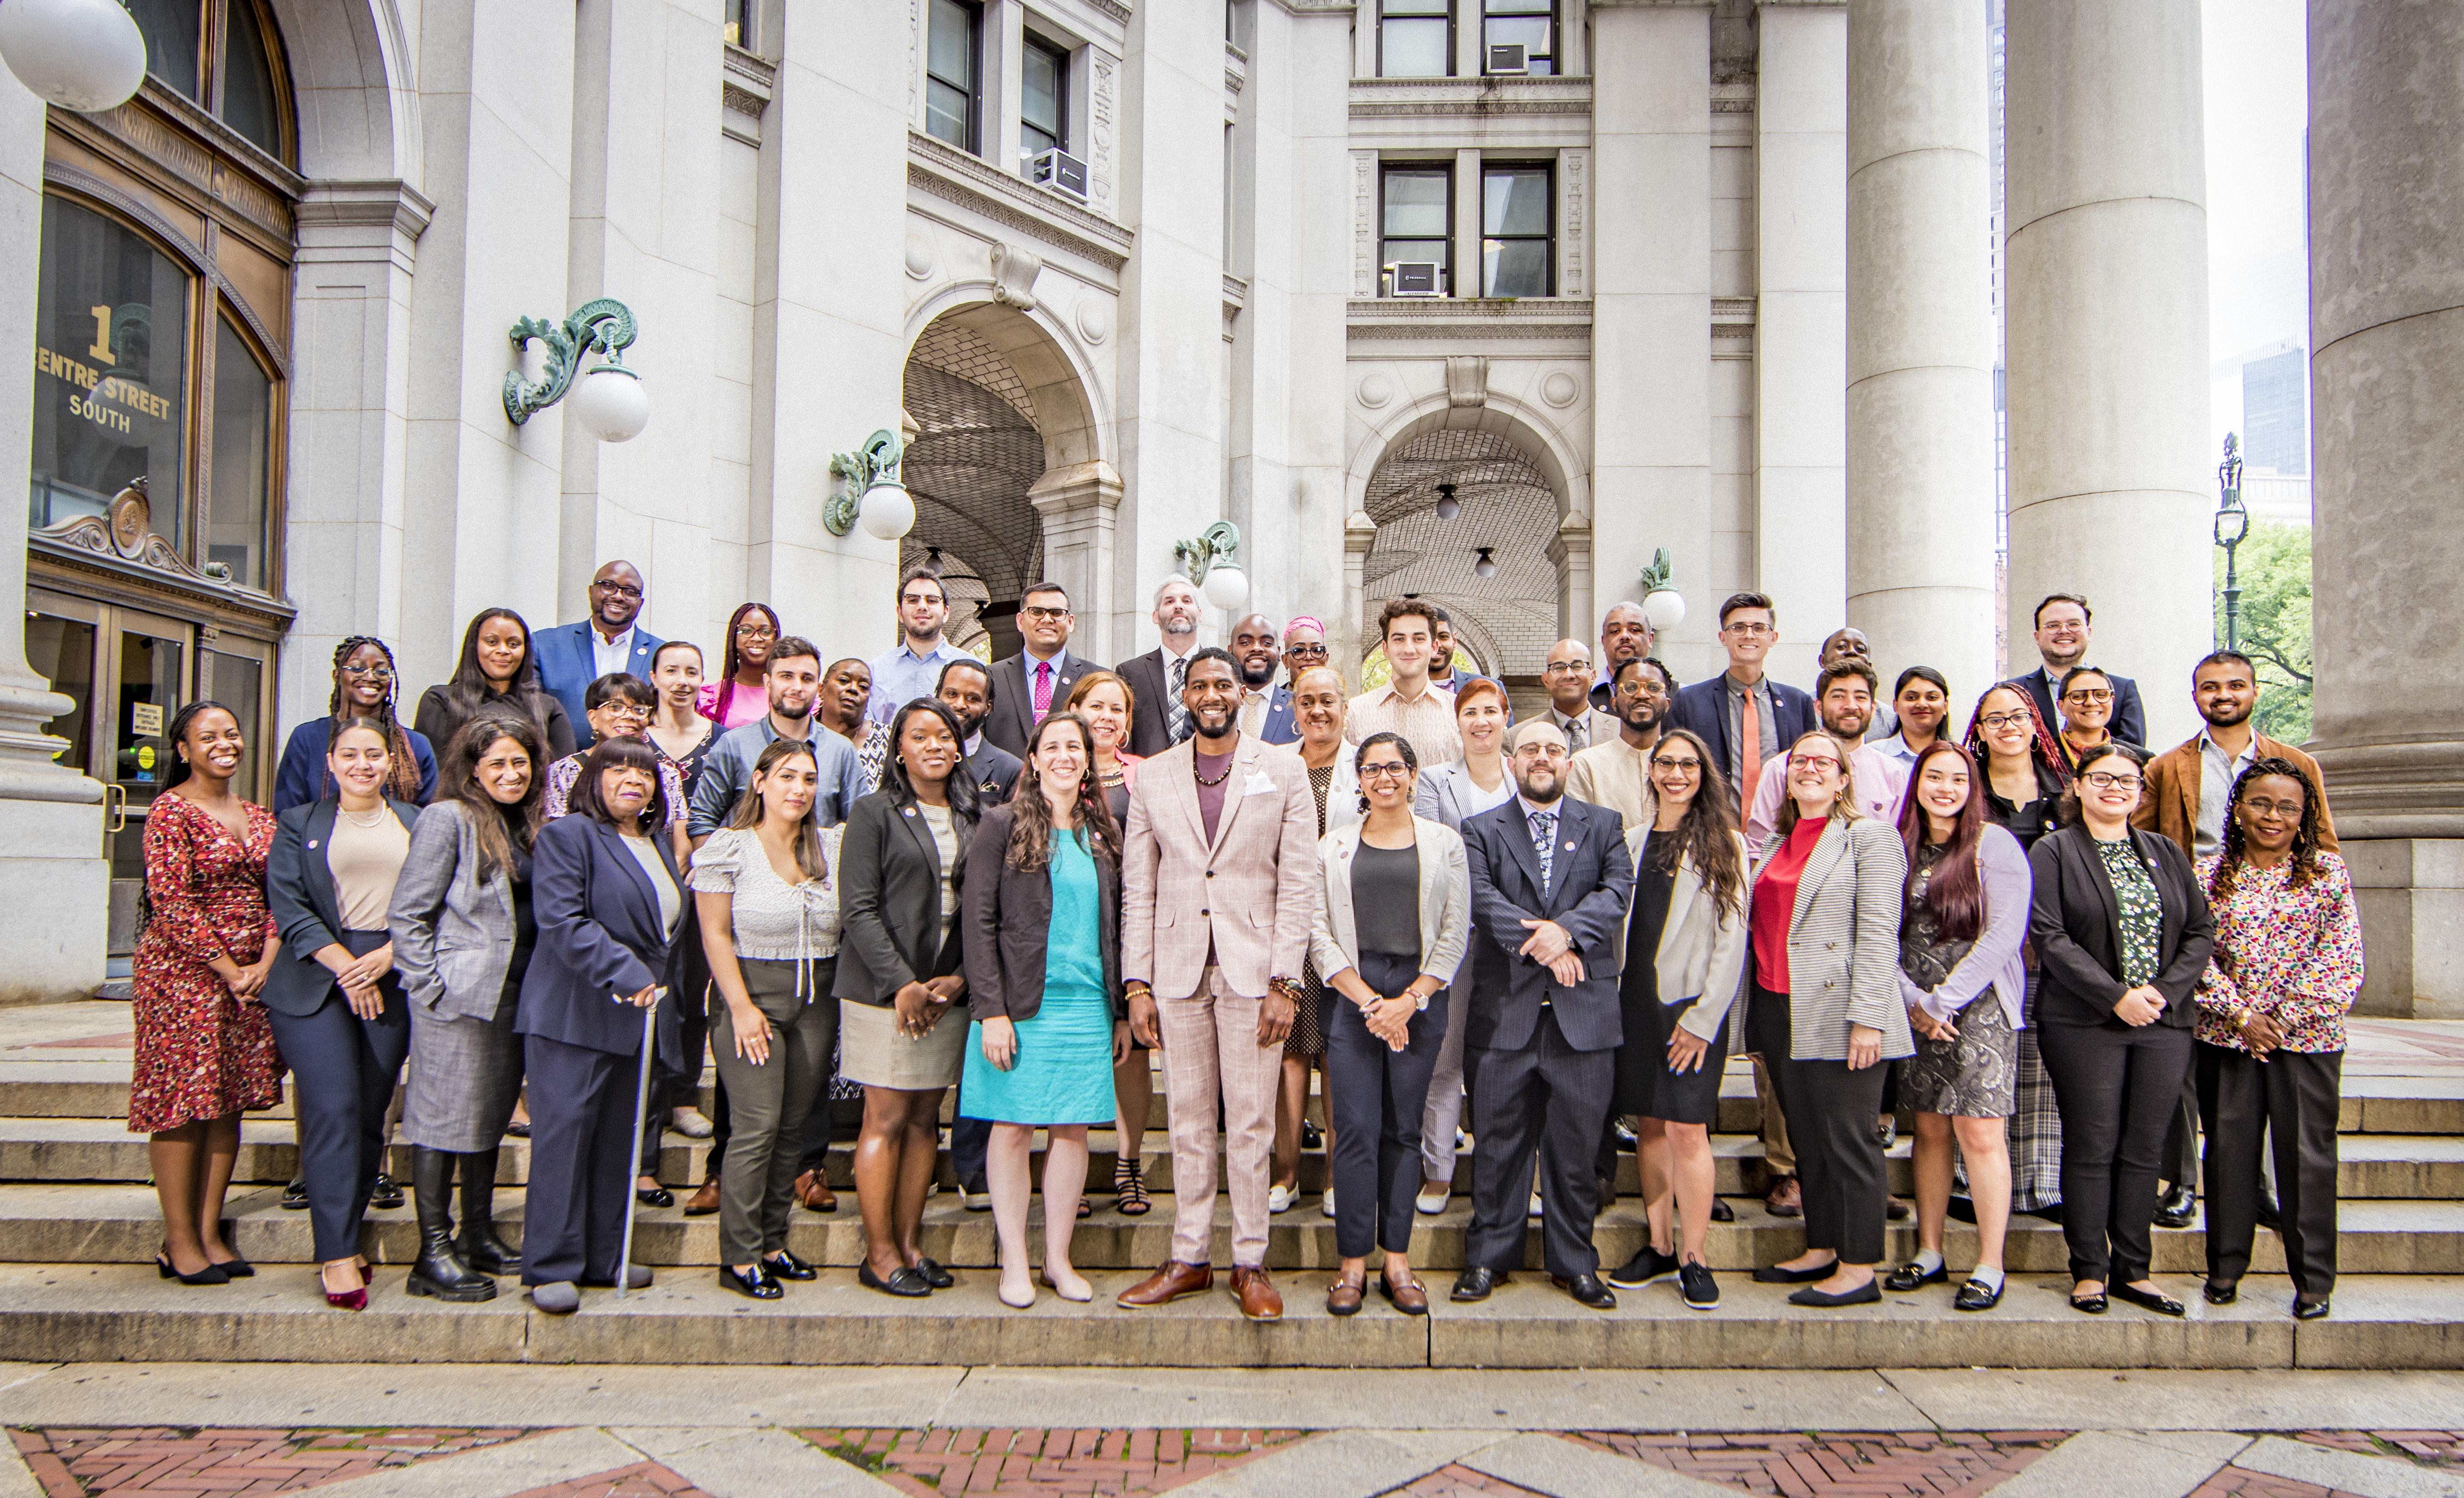 Office of the Public Advocate staff photo on the steps of 1 Centre St. Plaza, outside of the Dinkins building. The Public Advocate stands in the center of the front row, with 4 rows of staff members around him.